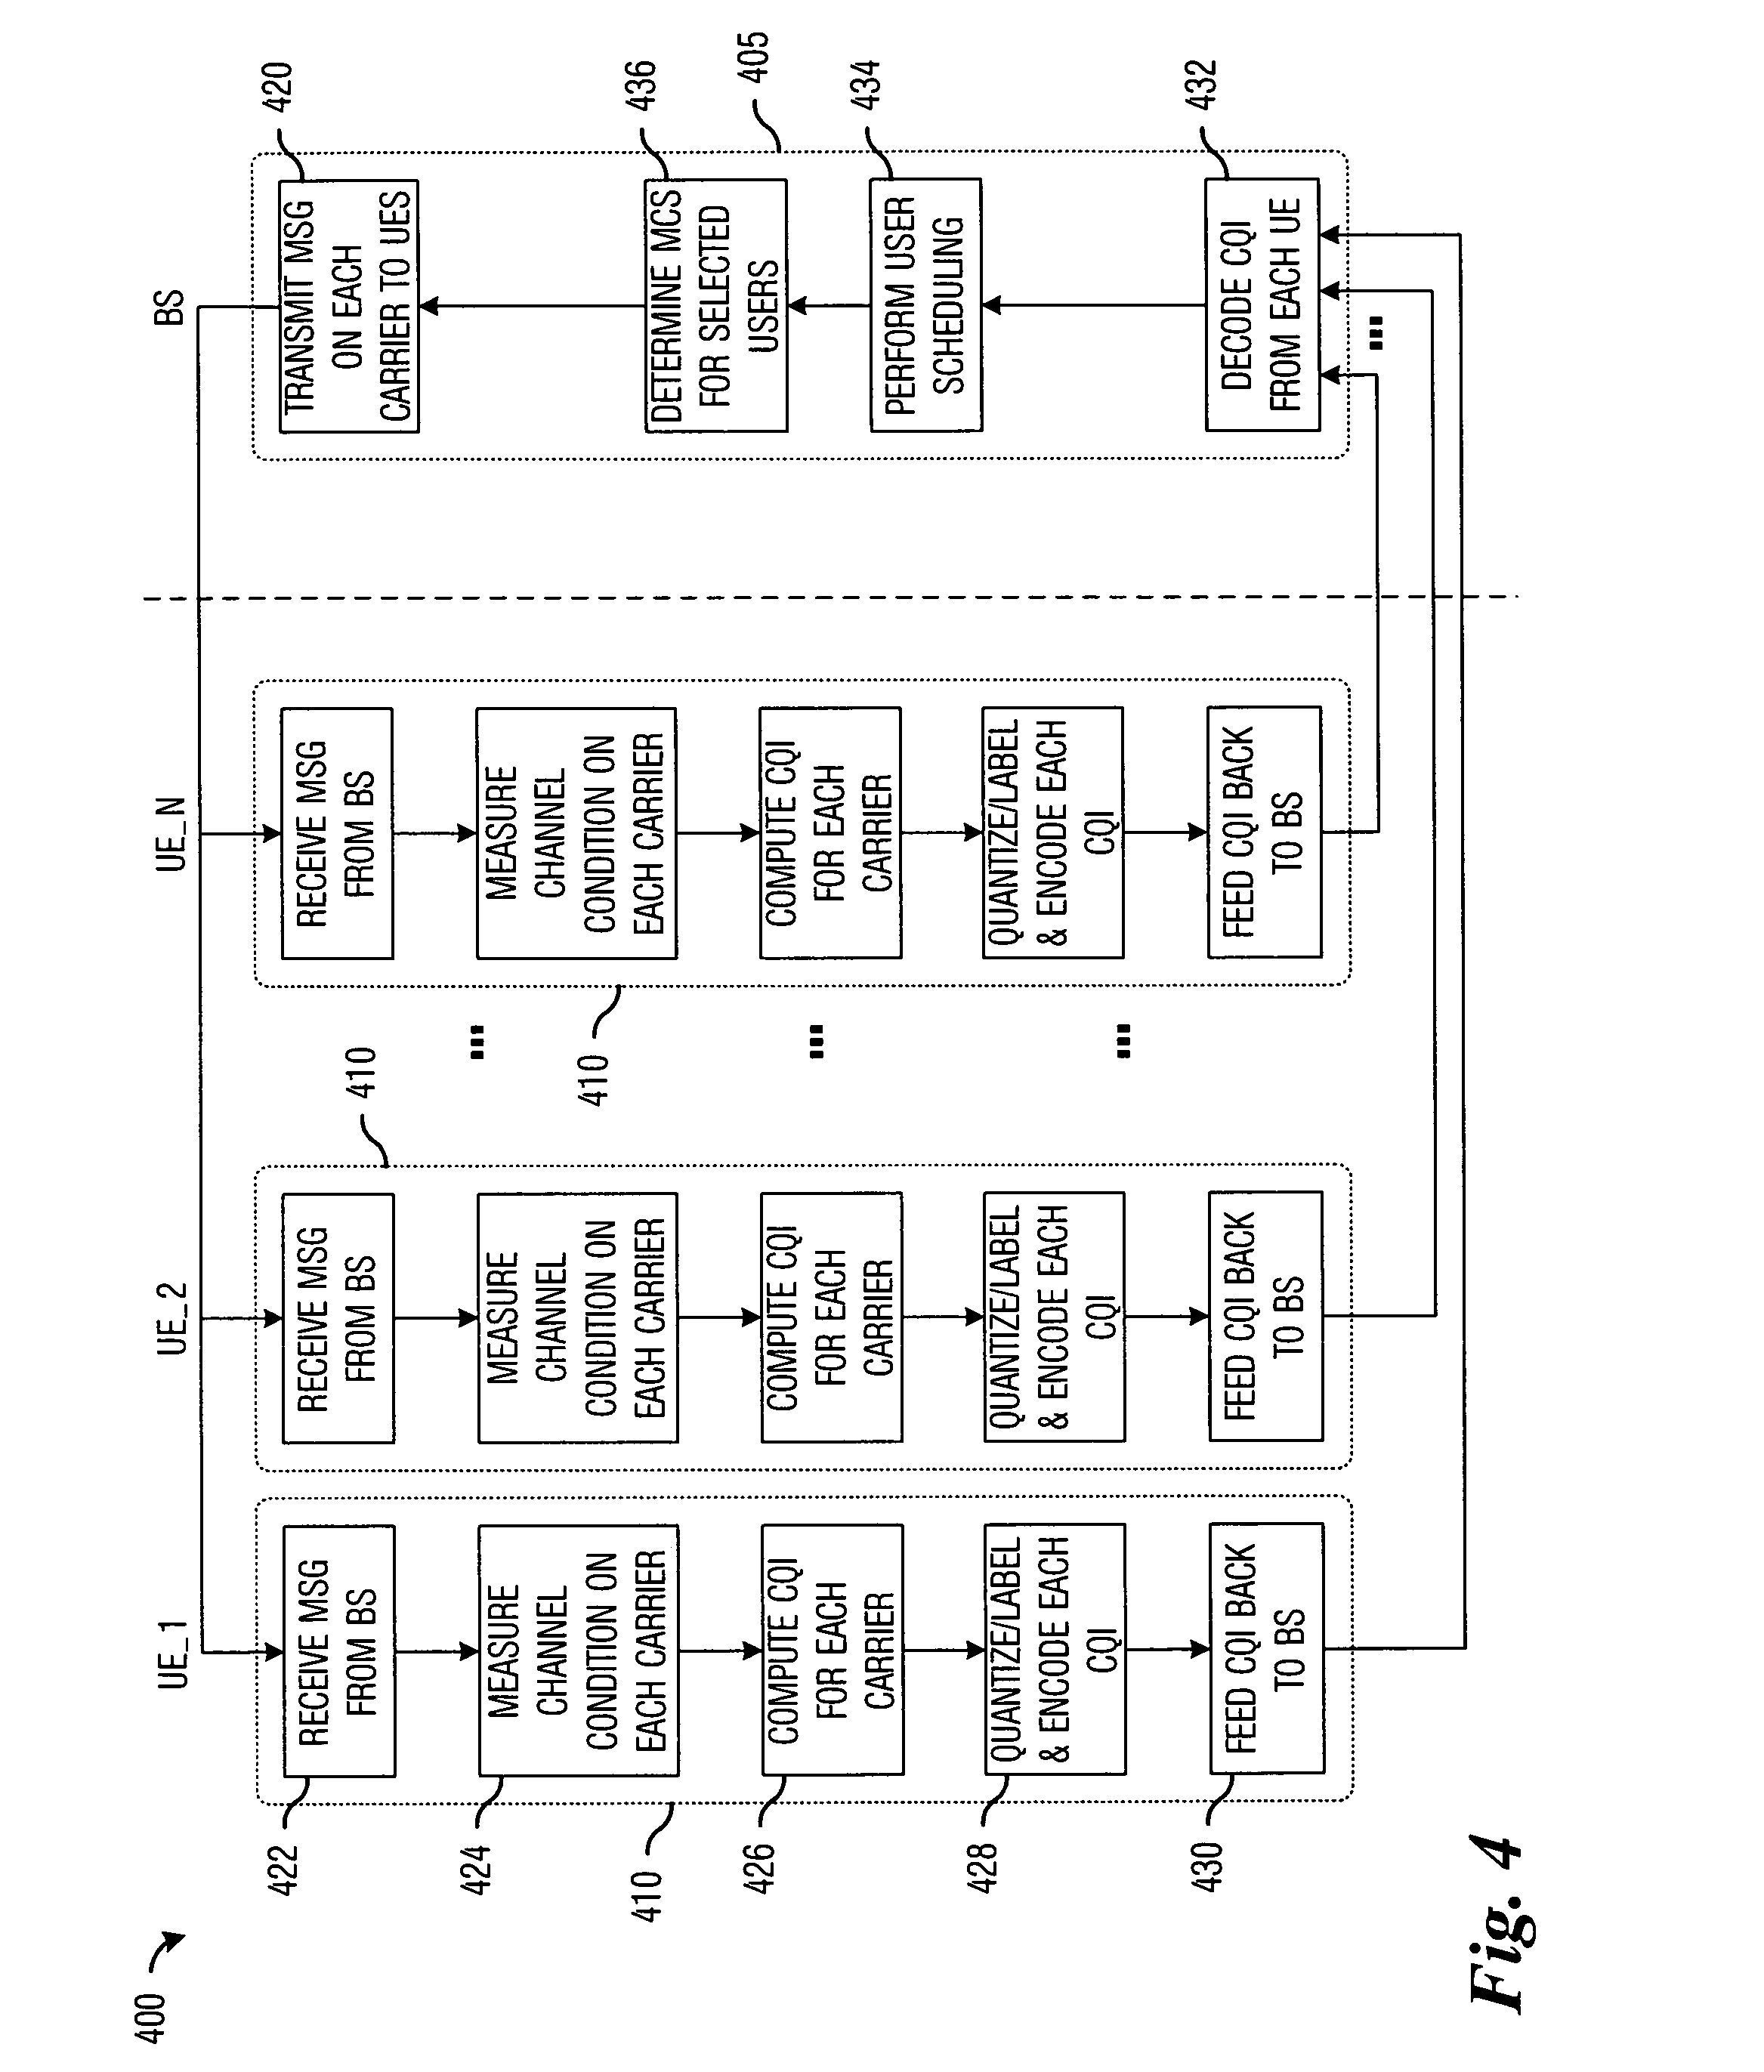 Method for channel quality indicator computation and feedback in a multi-carrier communications system